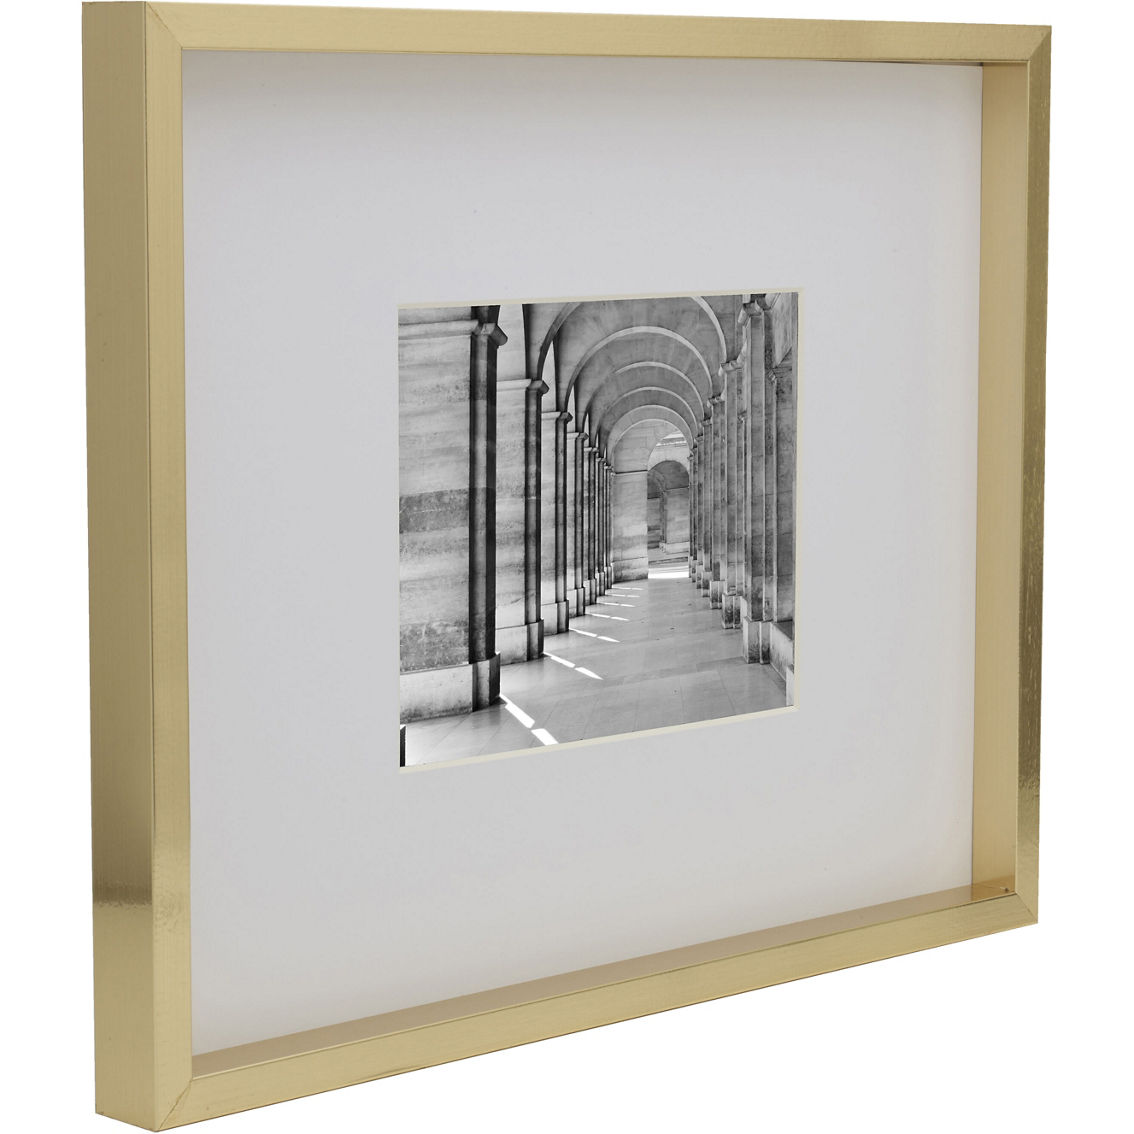 Mikasa Home 8x10 / 16x20 Gold Gallery Frame - Image 3 of 6